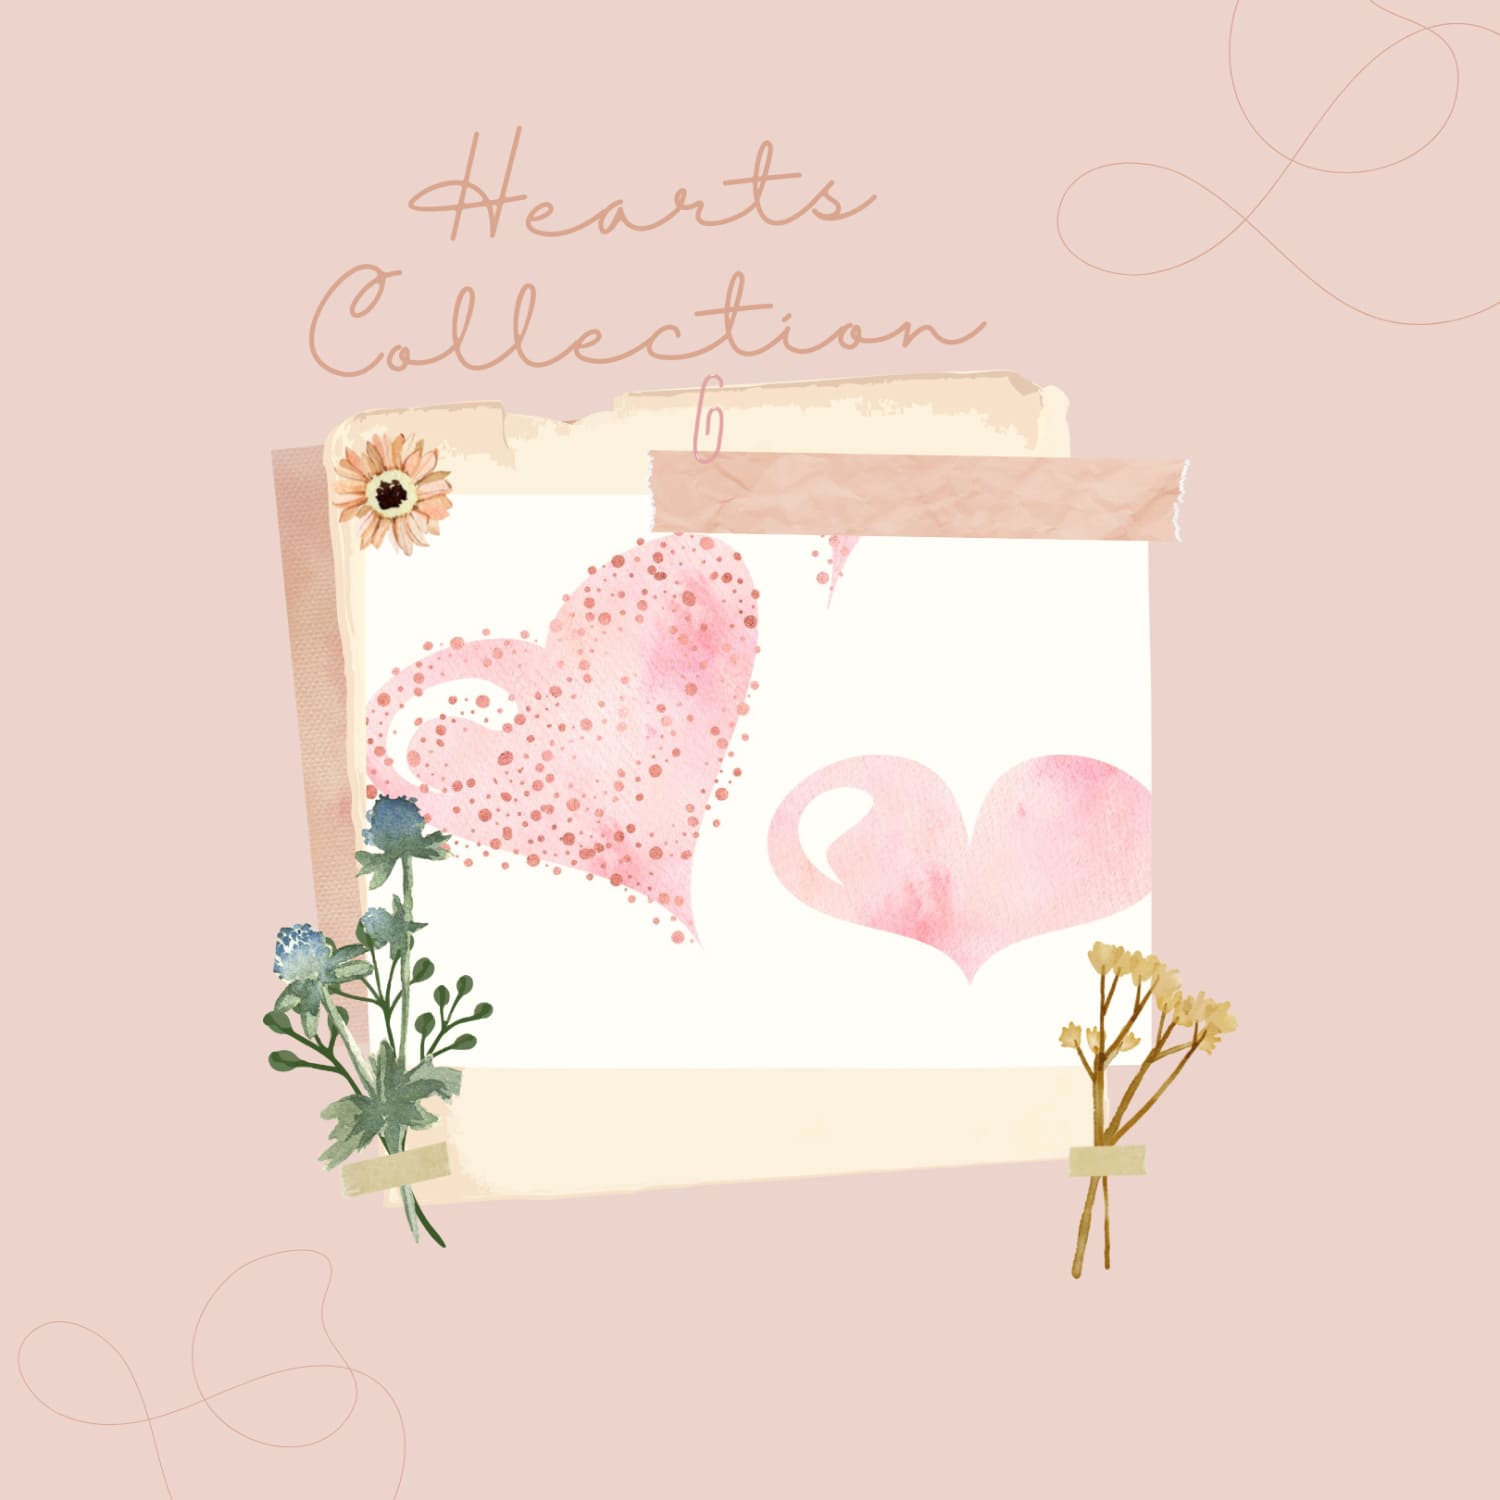 Watercolor Hearts Collection 002 - main image preview.